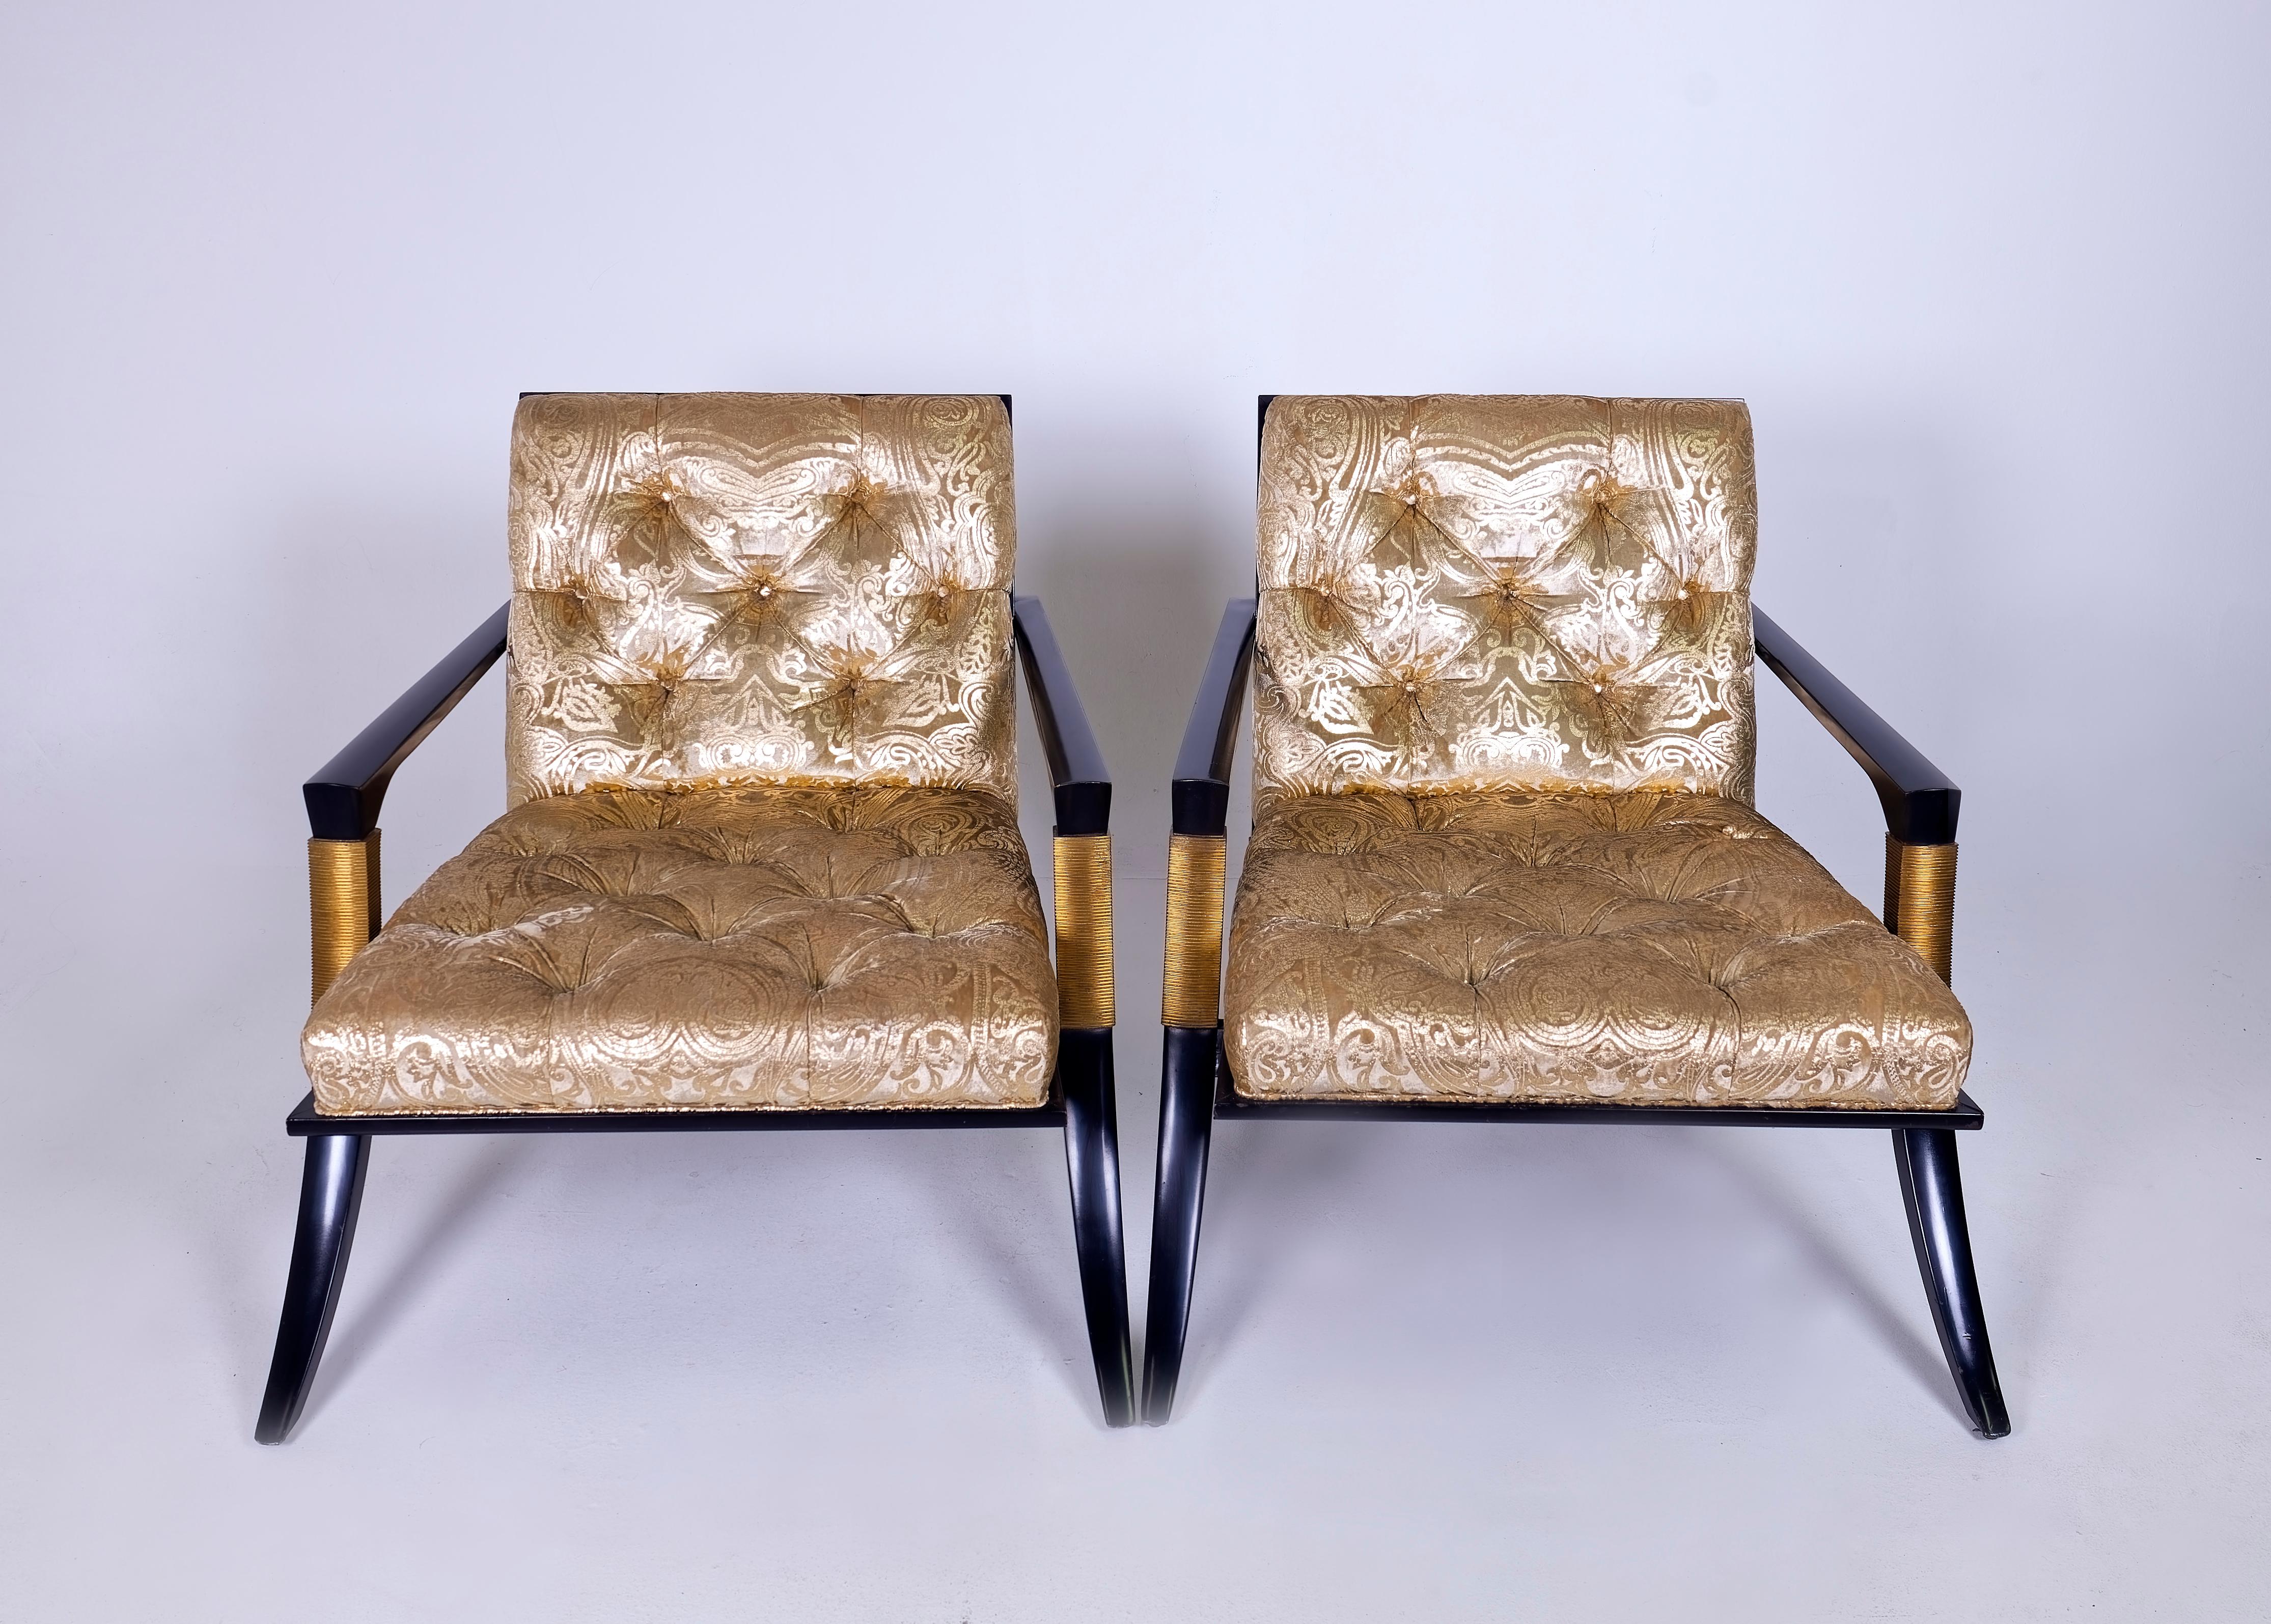 Contemporary Pair of Athens Lounge Chairs by Thomas Pheasant for Baker, Klismos Gold Tufted For Sale